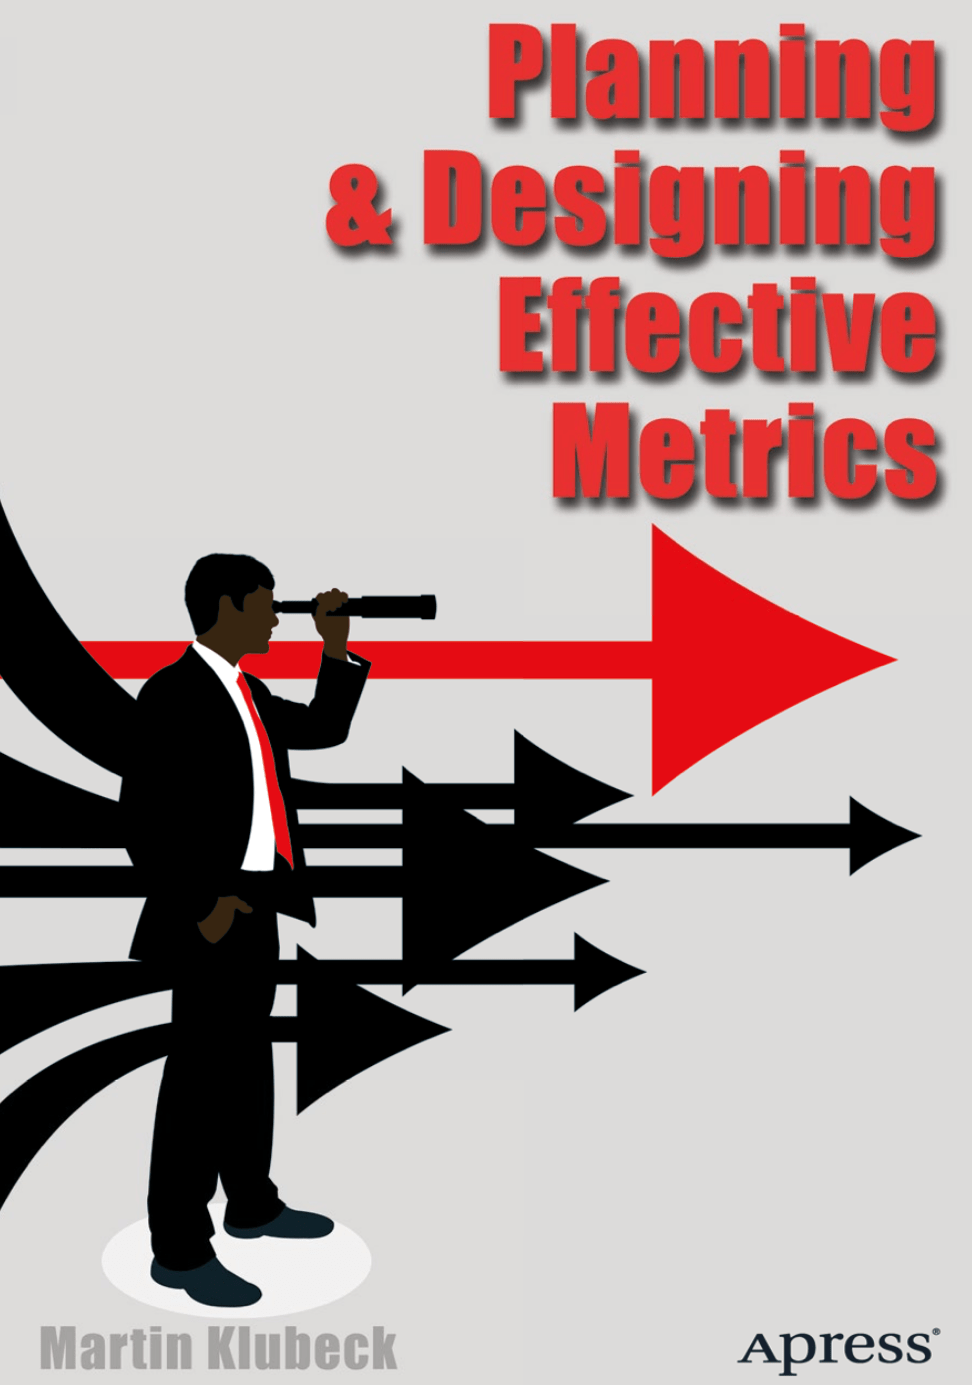 Planning and Designing Effective Metrics read online at BusinessBooks.cc